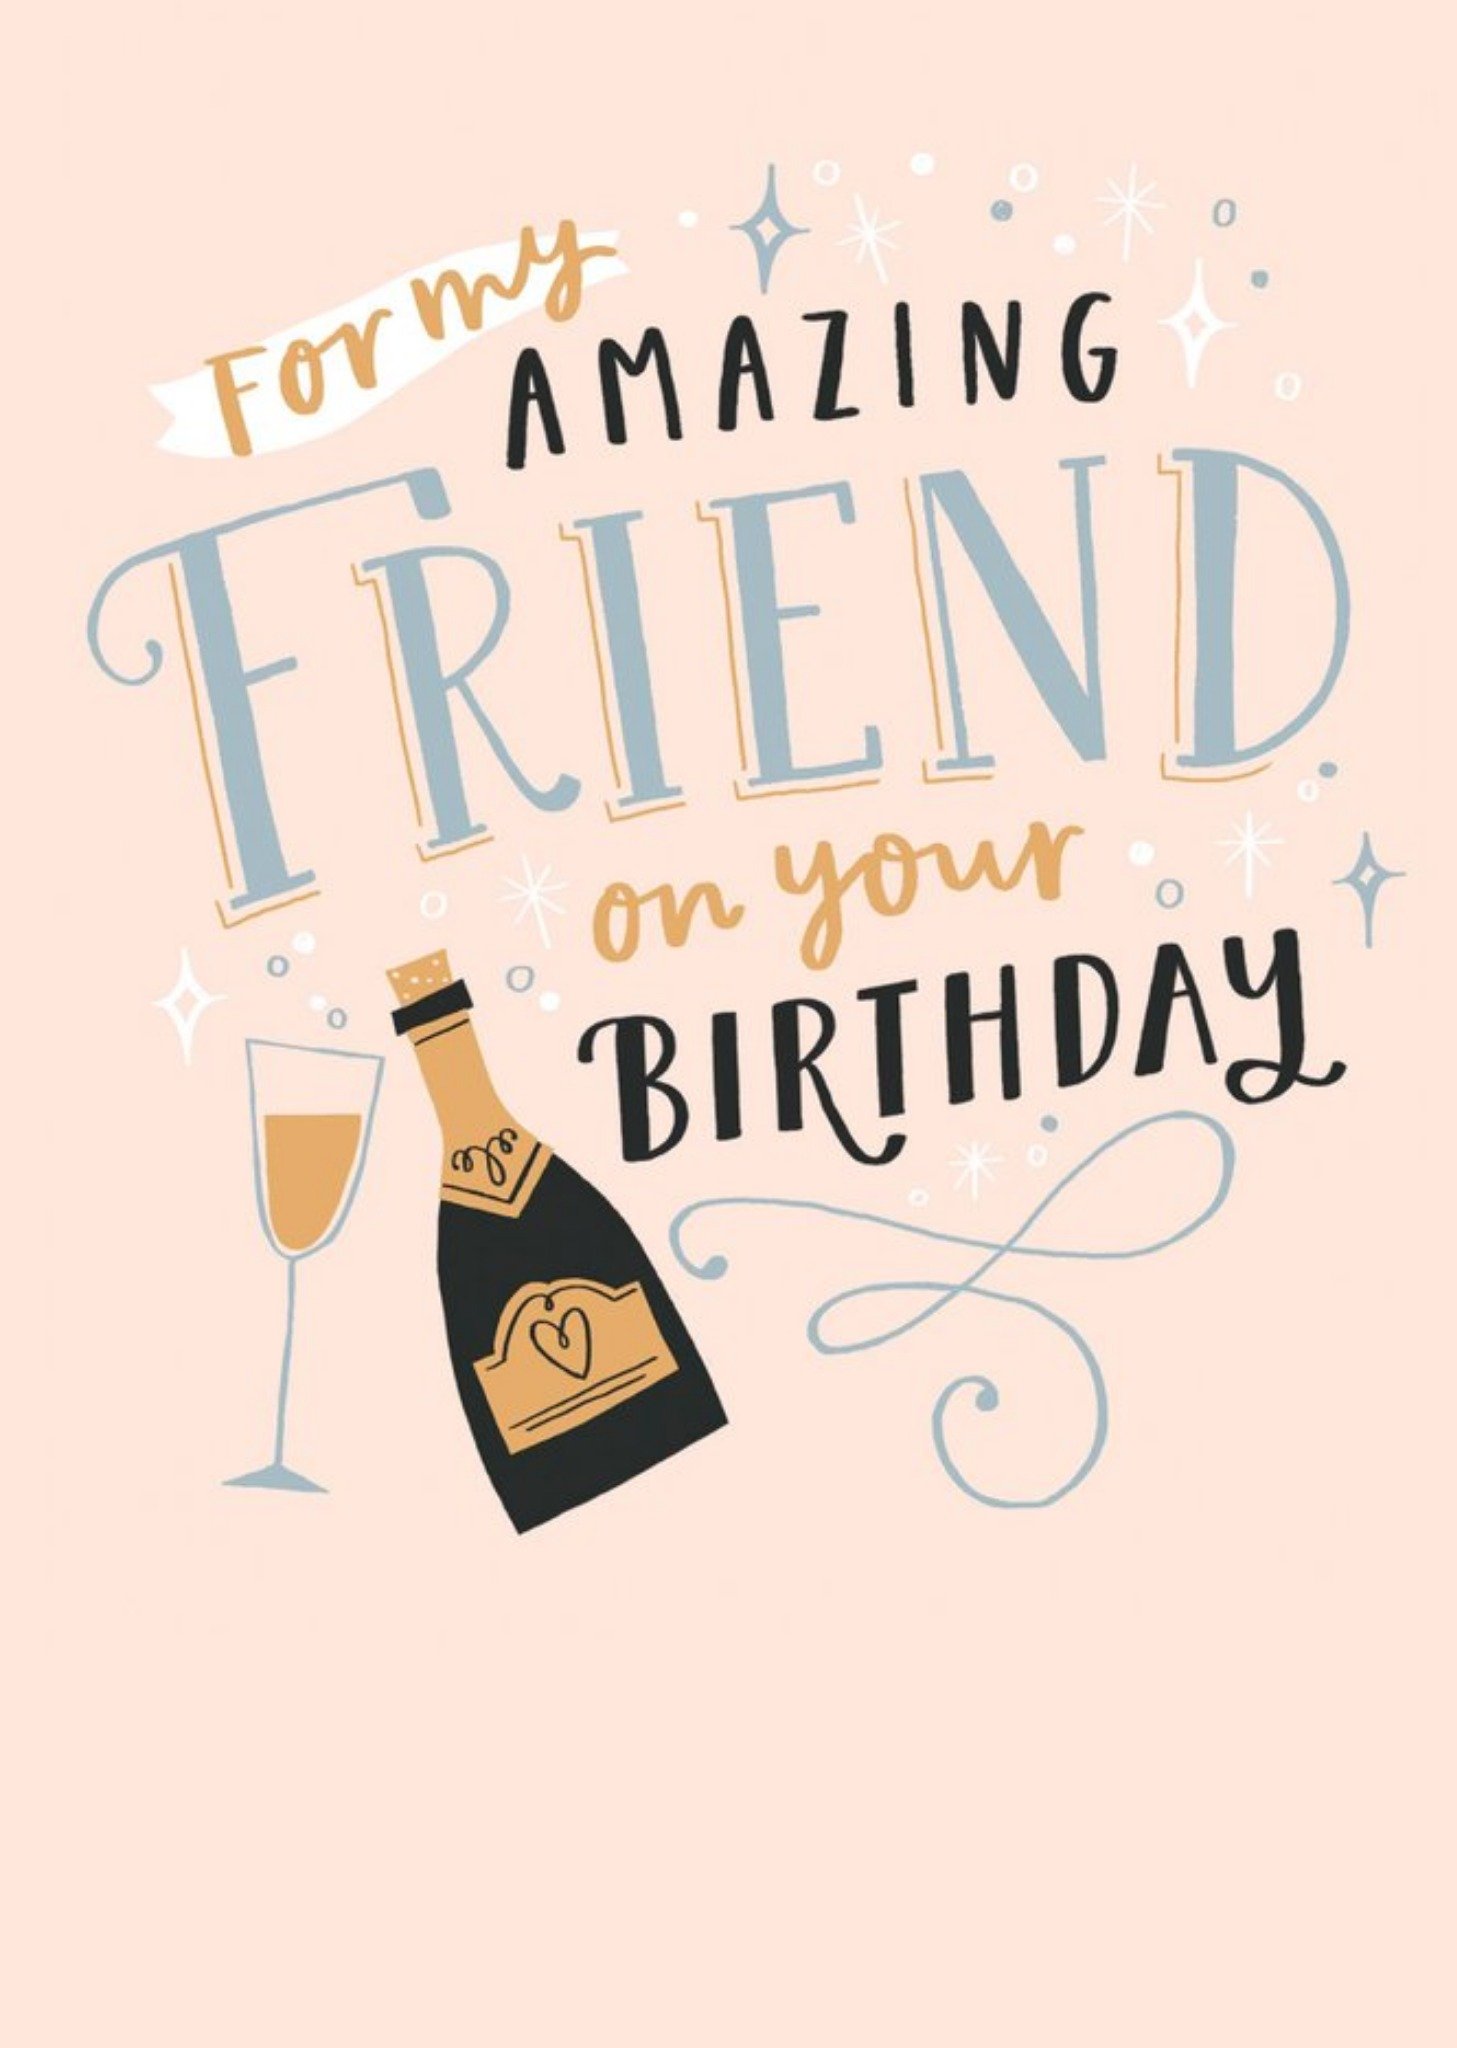 Moonpig Illustrated Champagne Bottle Typographic Friend Birthday Card, Large